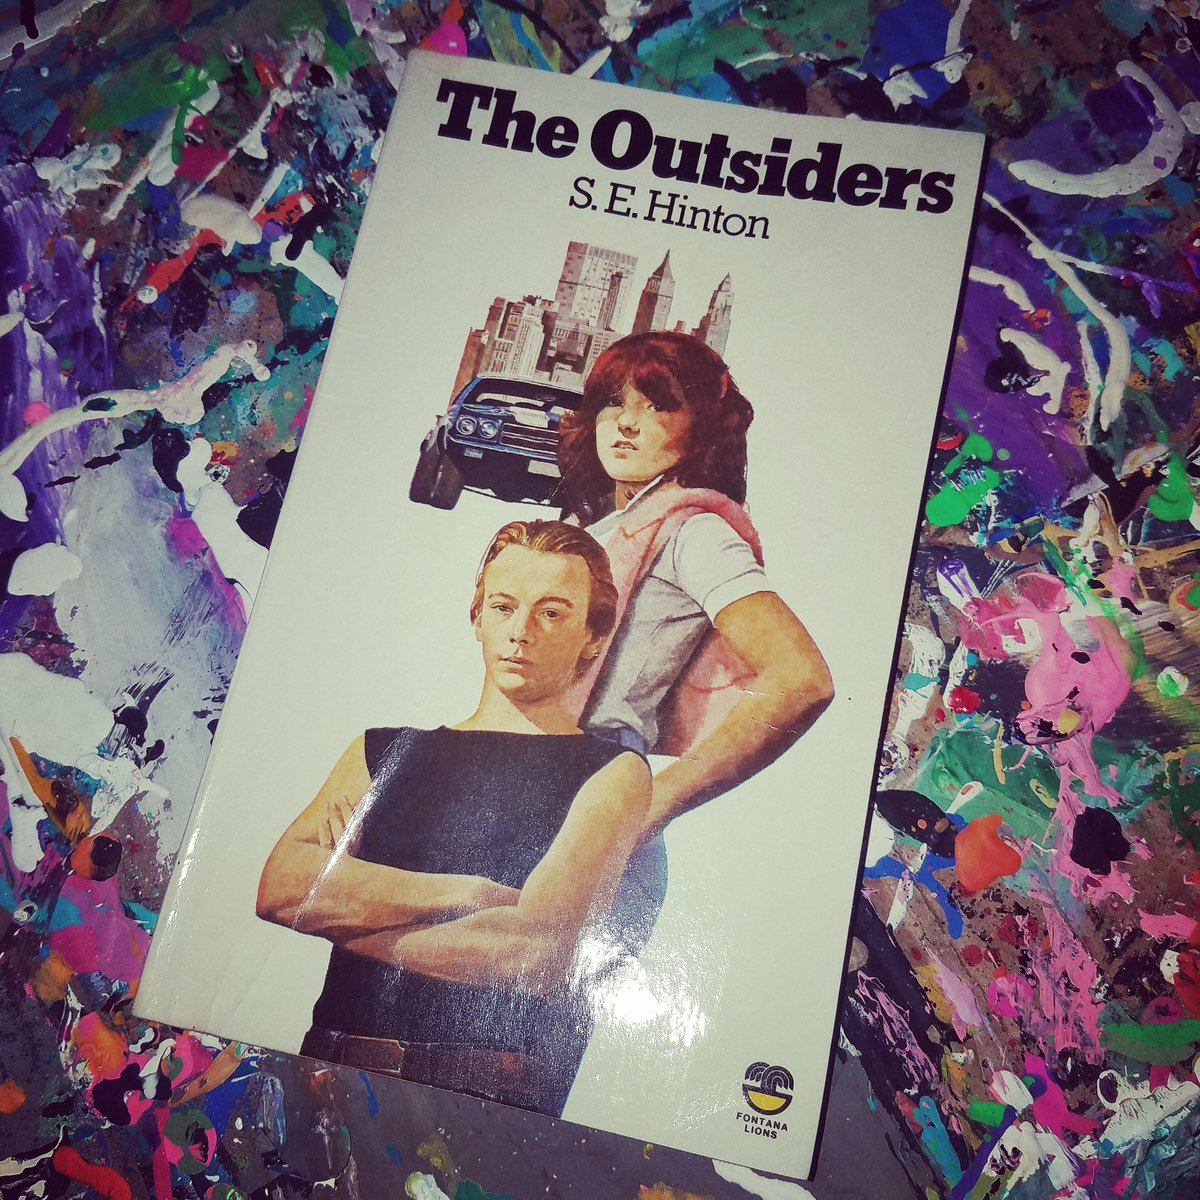 This copy of 'The Outsiders' was shipped from Australia. I do love this cover and is number 15 in my Outsiders book collection. How many more can I find! Collecting is fun! @se4realhinton 

#theoutsiders #bookcollecting